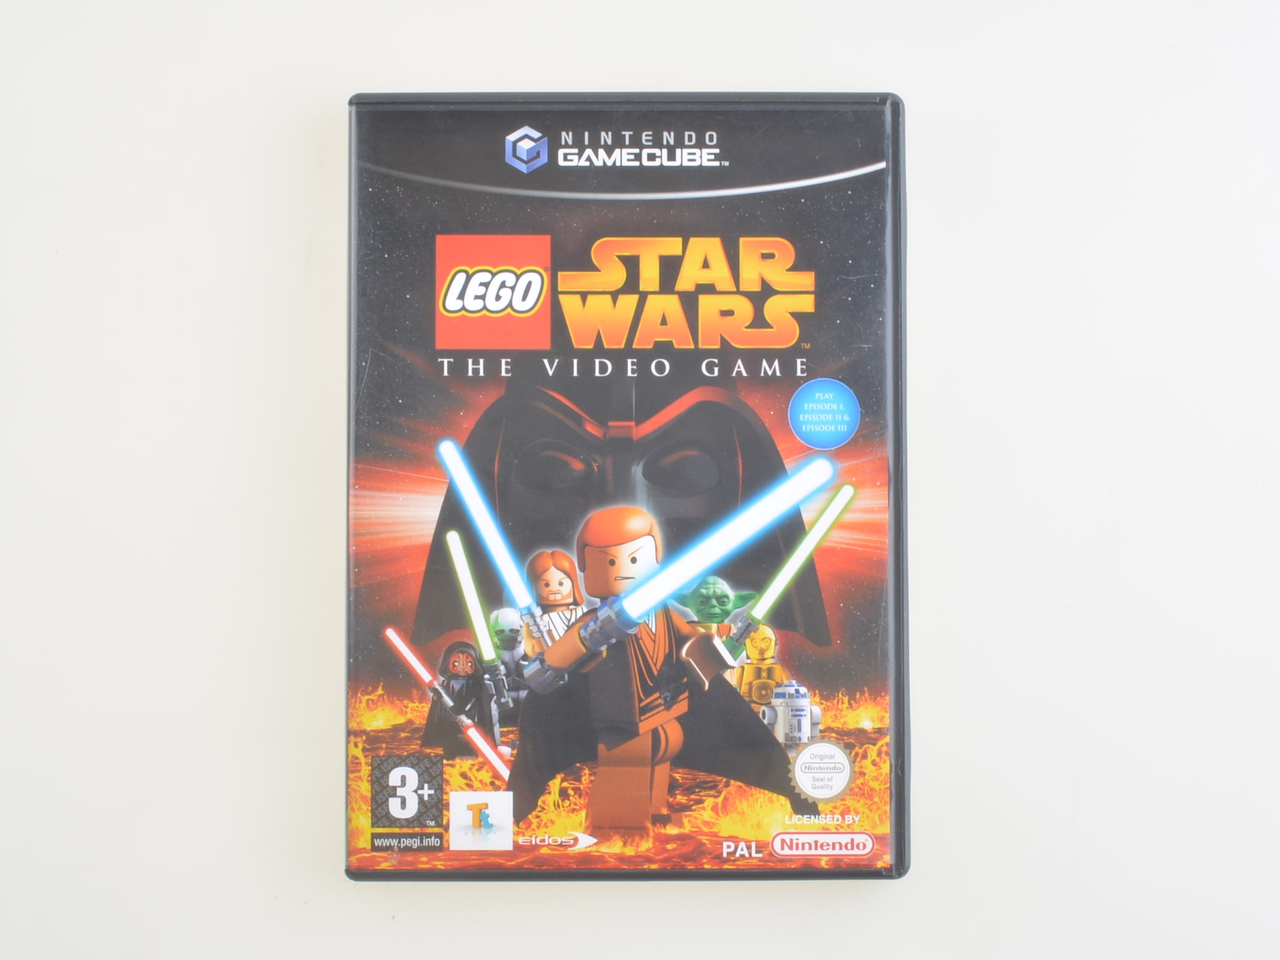 Lego Star Wars: The Video Game - Gamecube Games